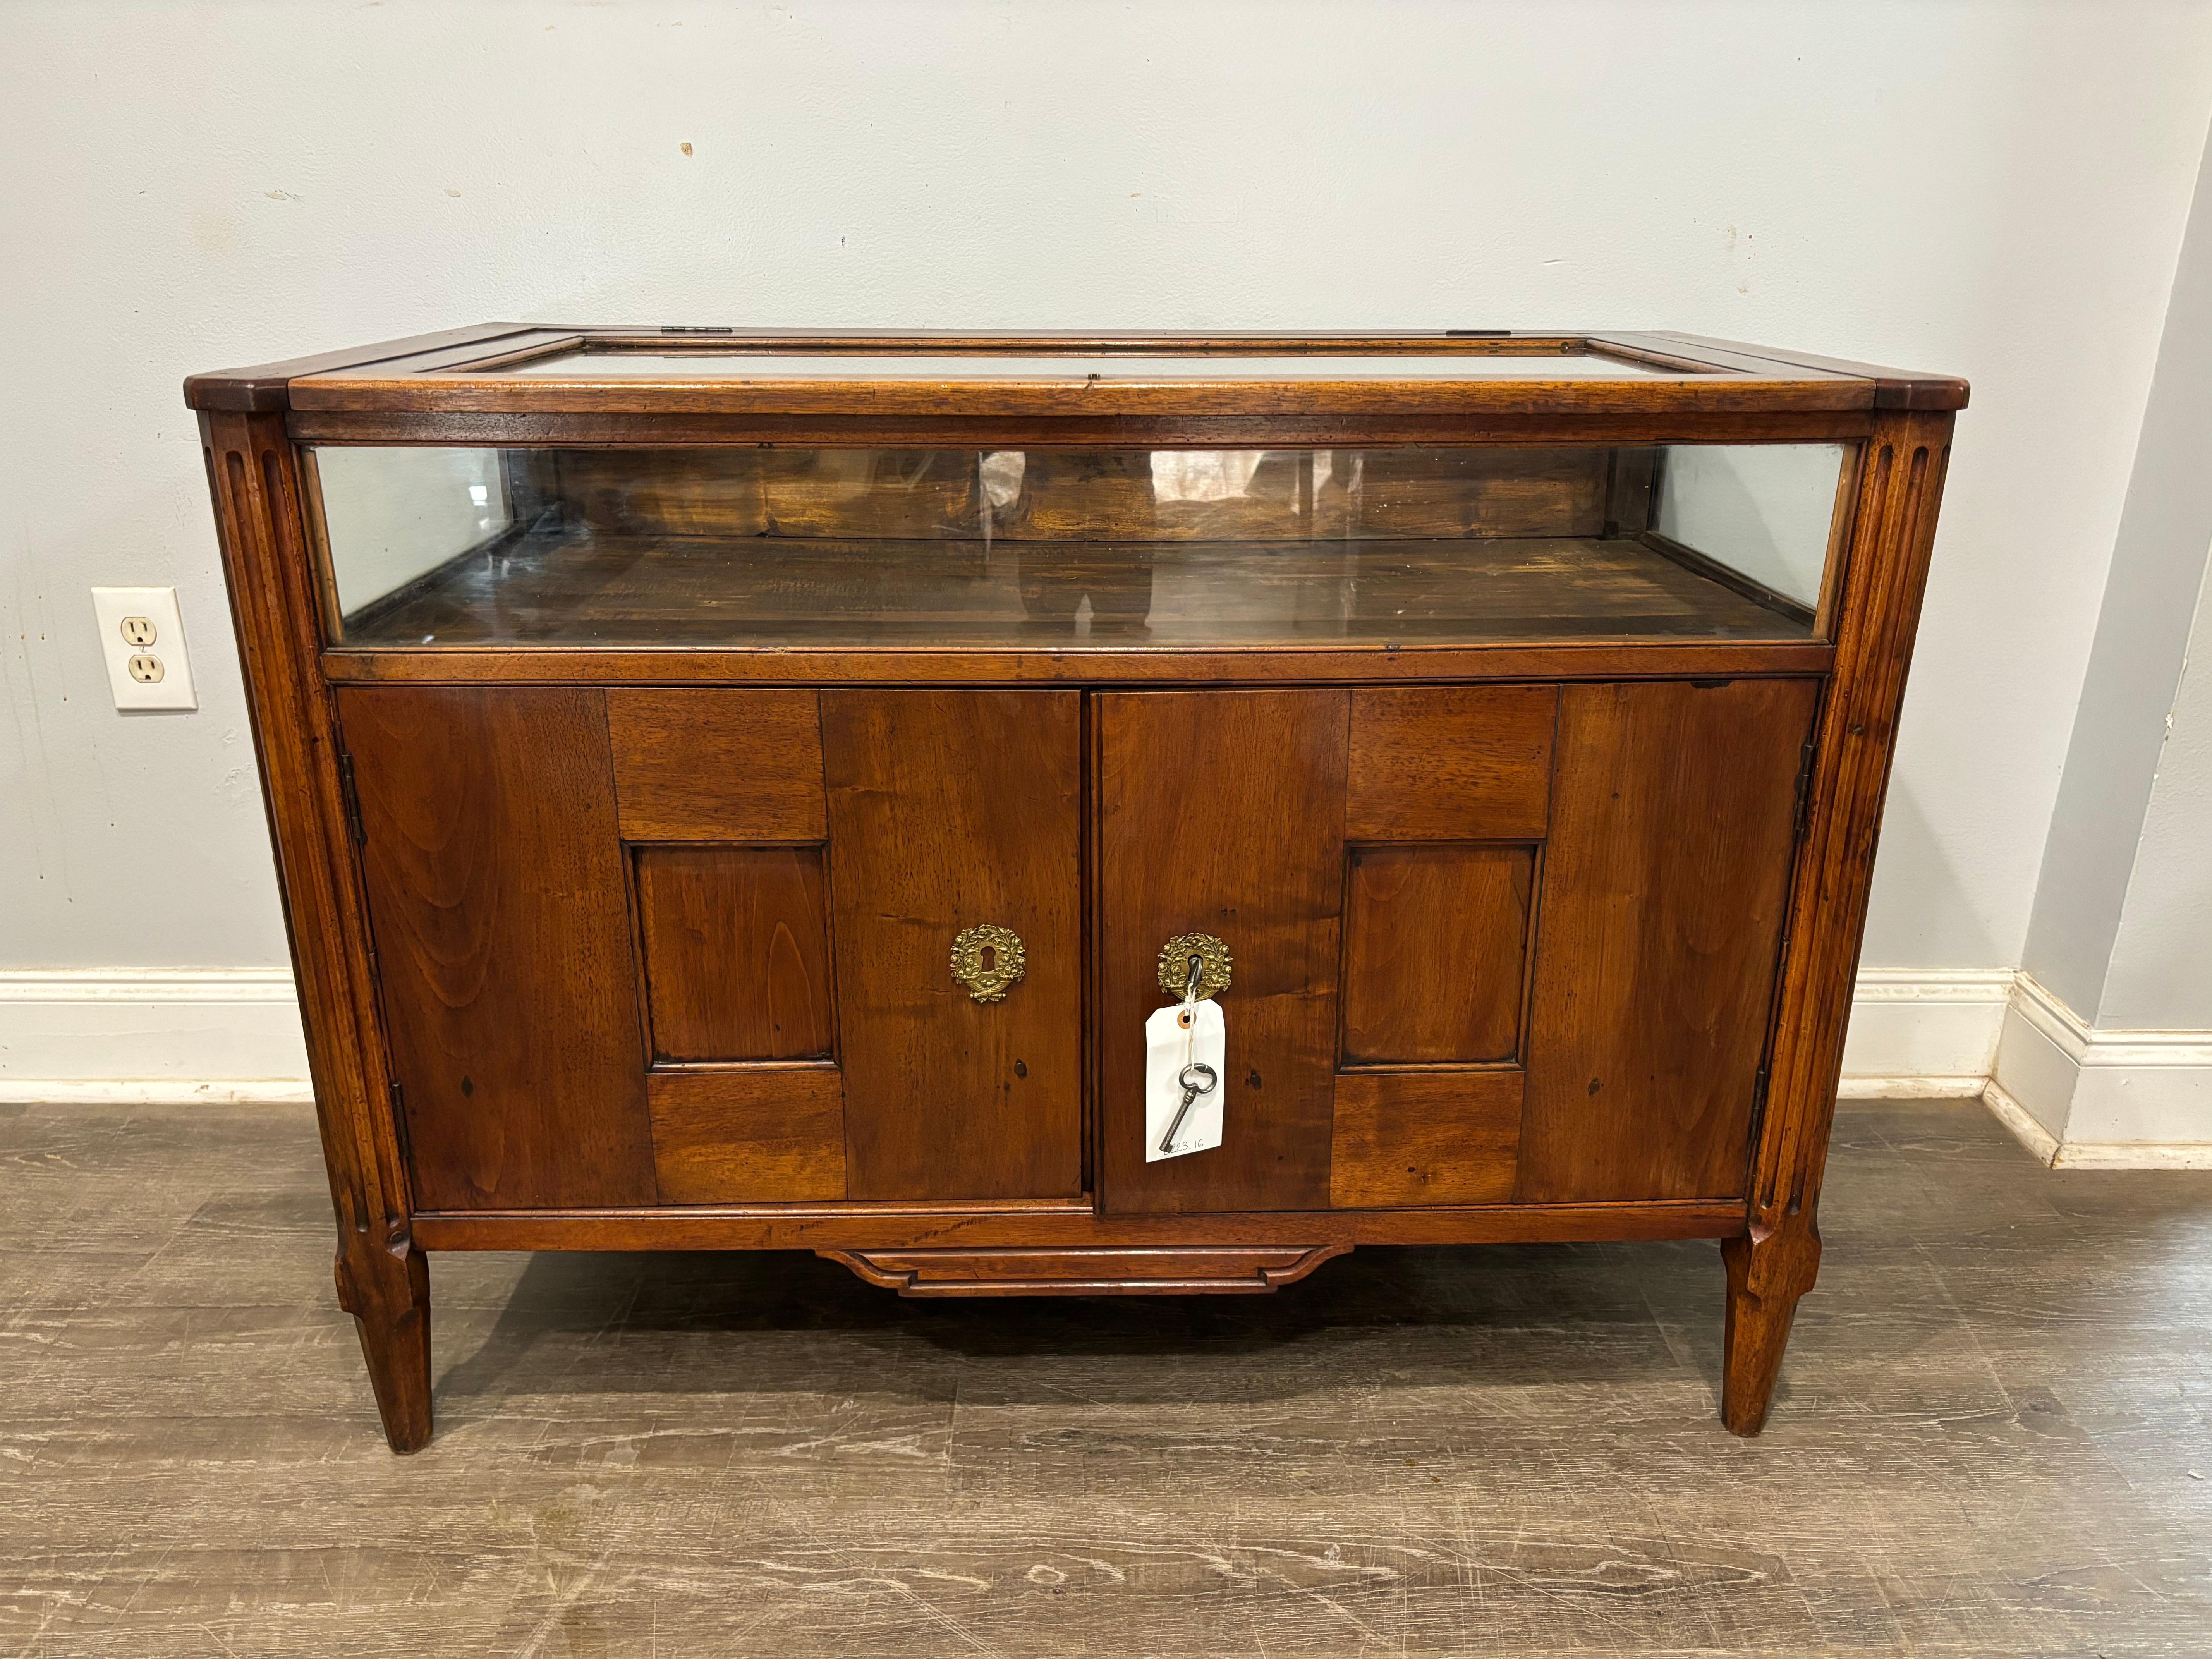 This buffet Vitrine is made of walnut and is interesting as a vitrine. There is a key to lock the top. 